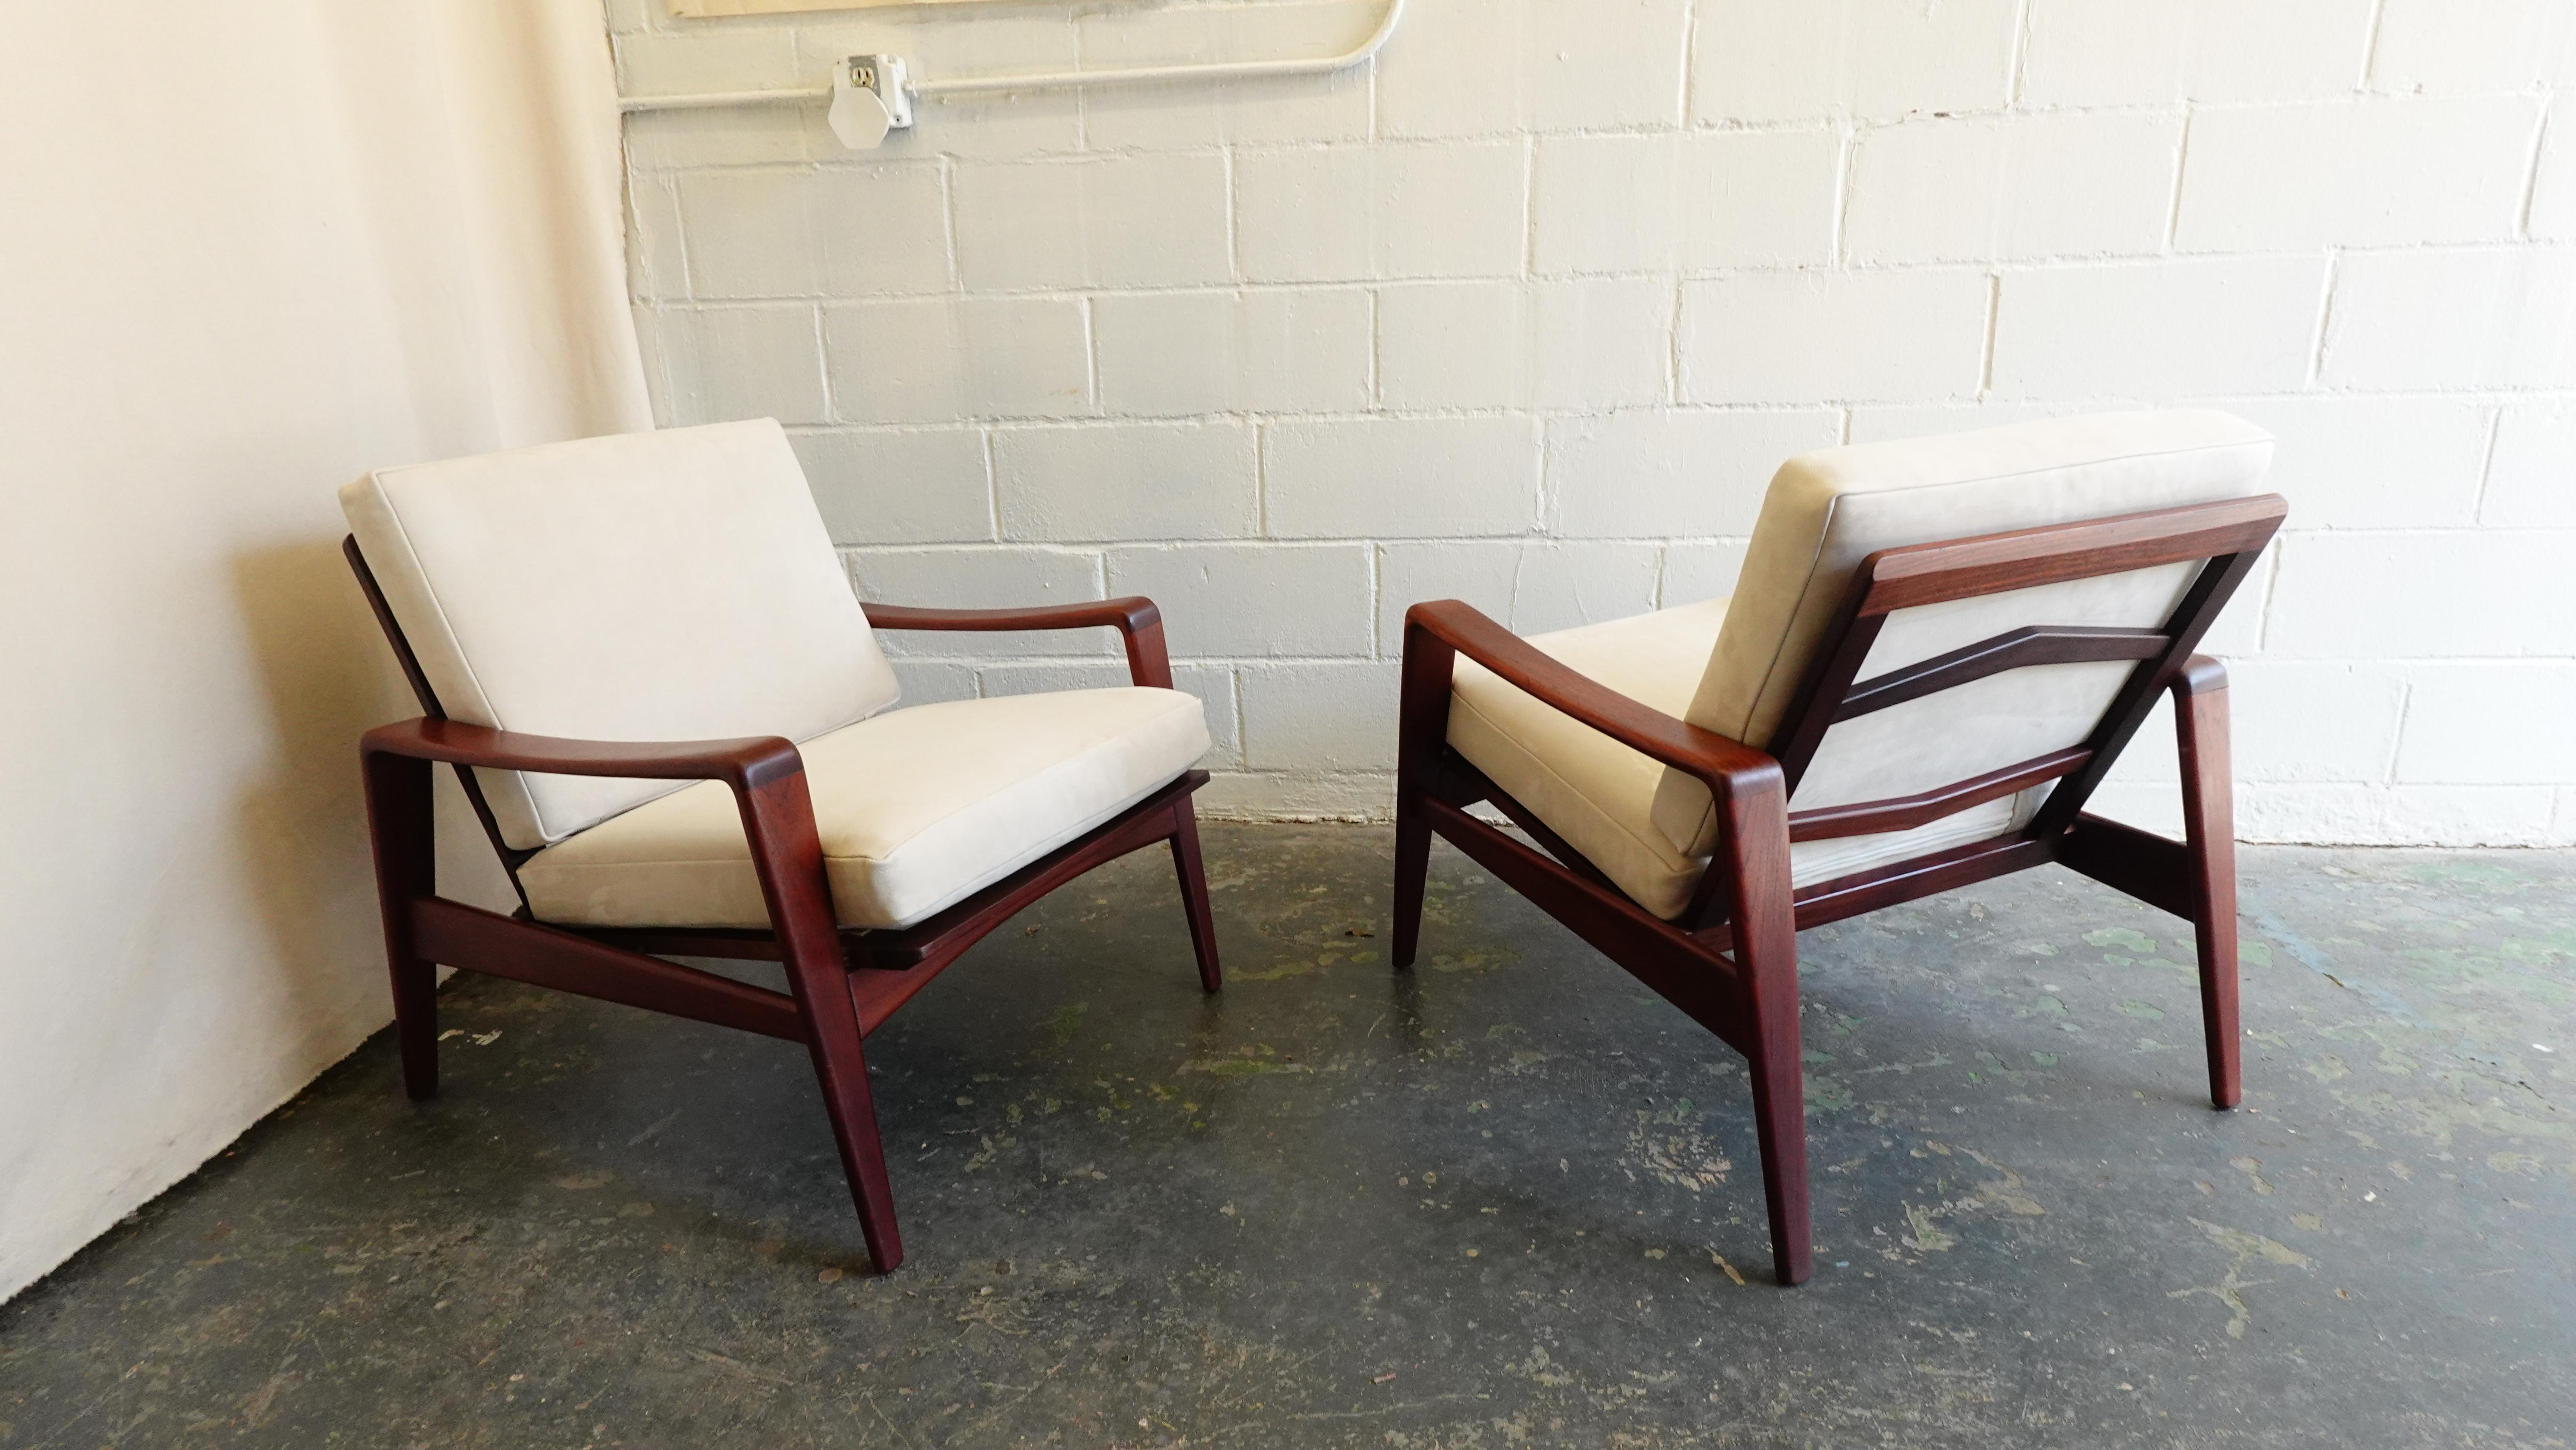 Pair of Arne Wahl Iverson Lounge Chairs for Komfort in Teak & Leather, 1960 For Sale 2